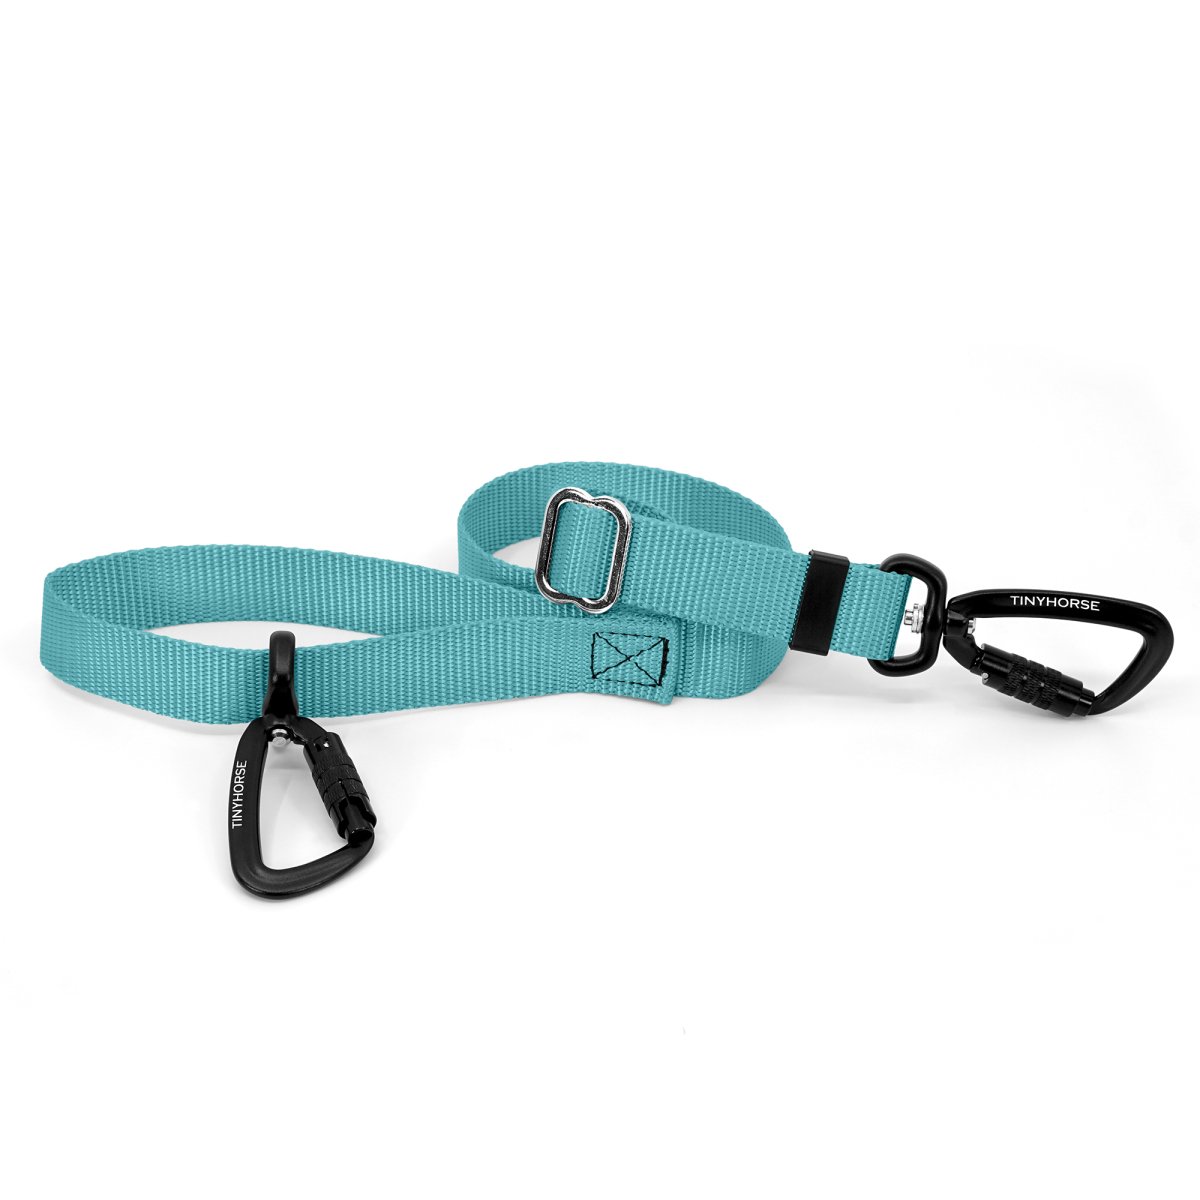 A baby blue-coloured Lead-All Lite with an adjustable nylon webbing leash and 2 auto-locking carabiners